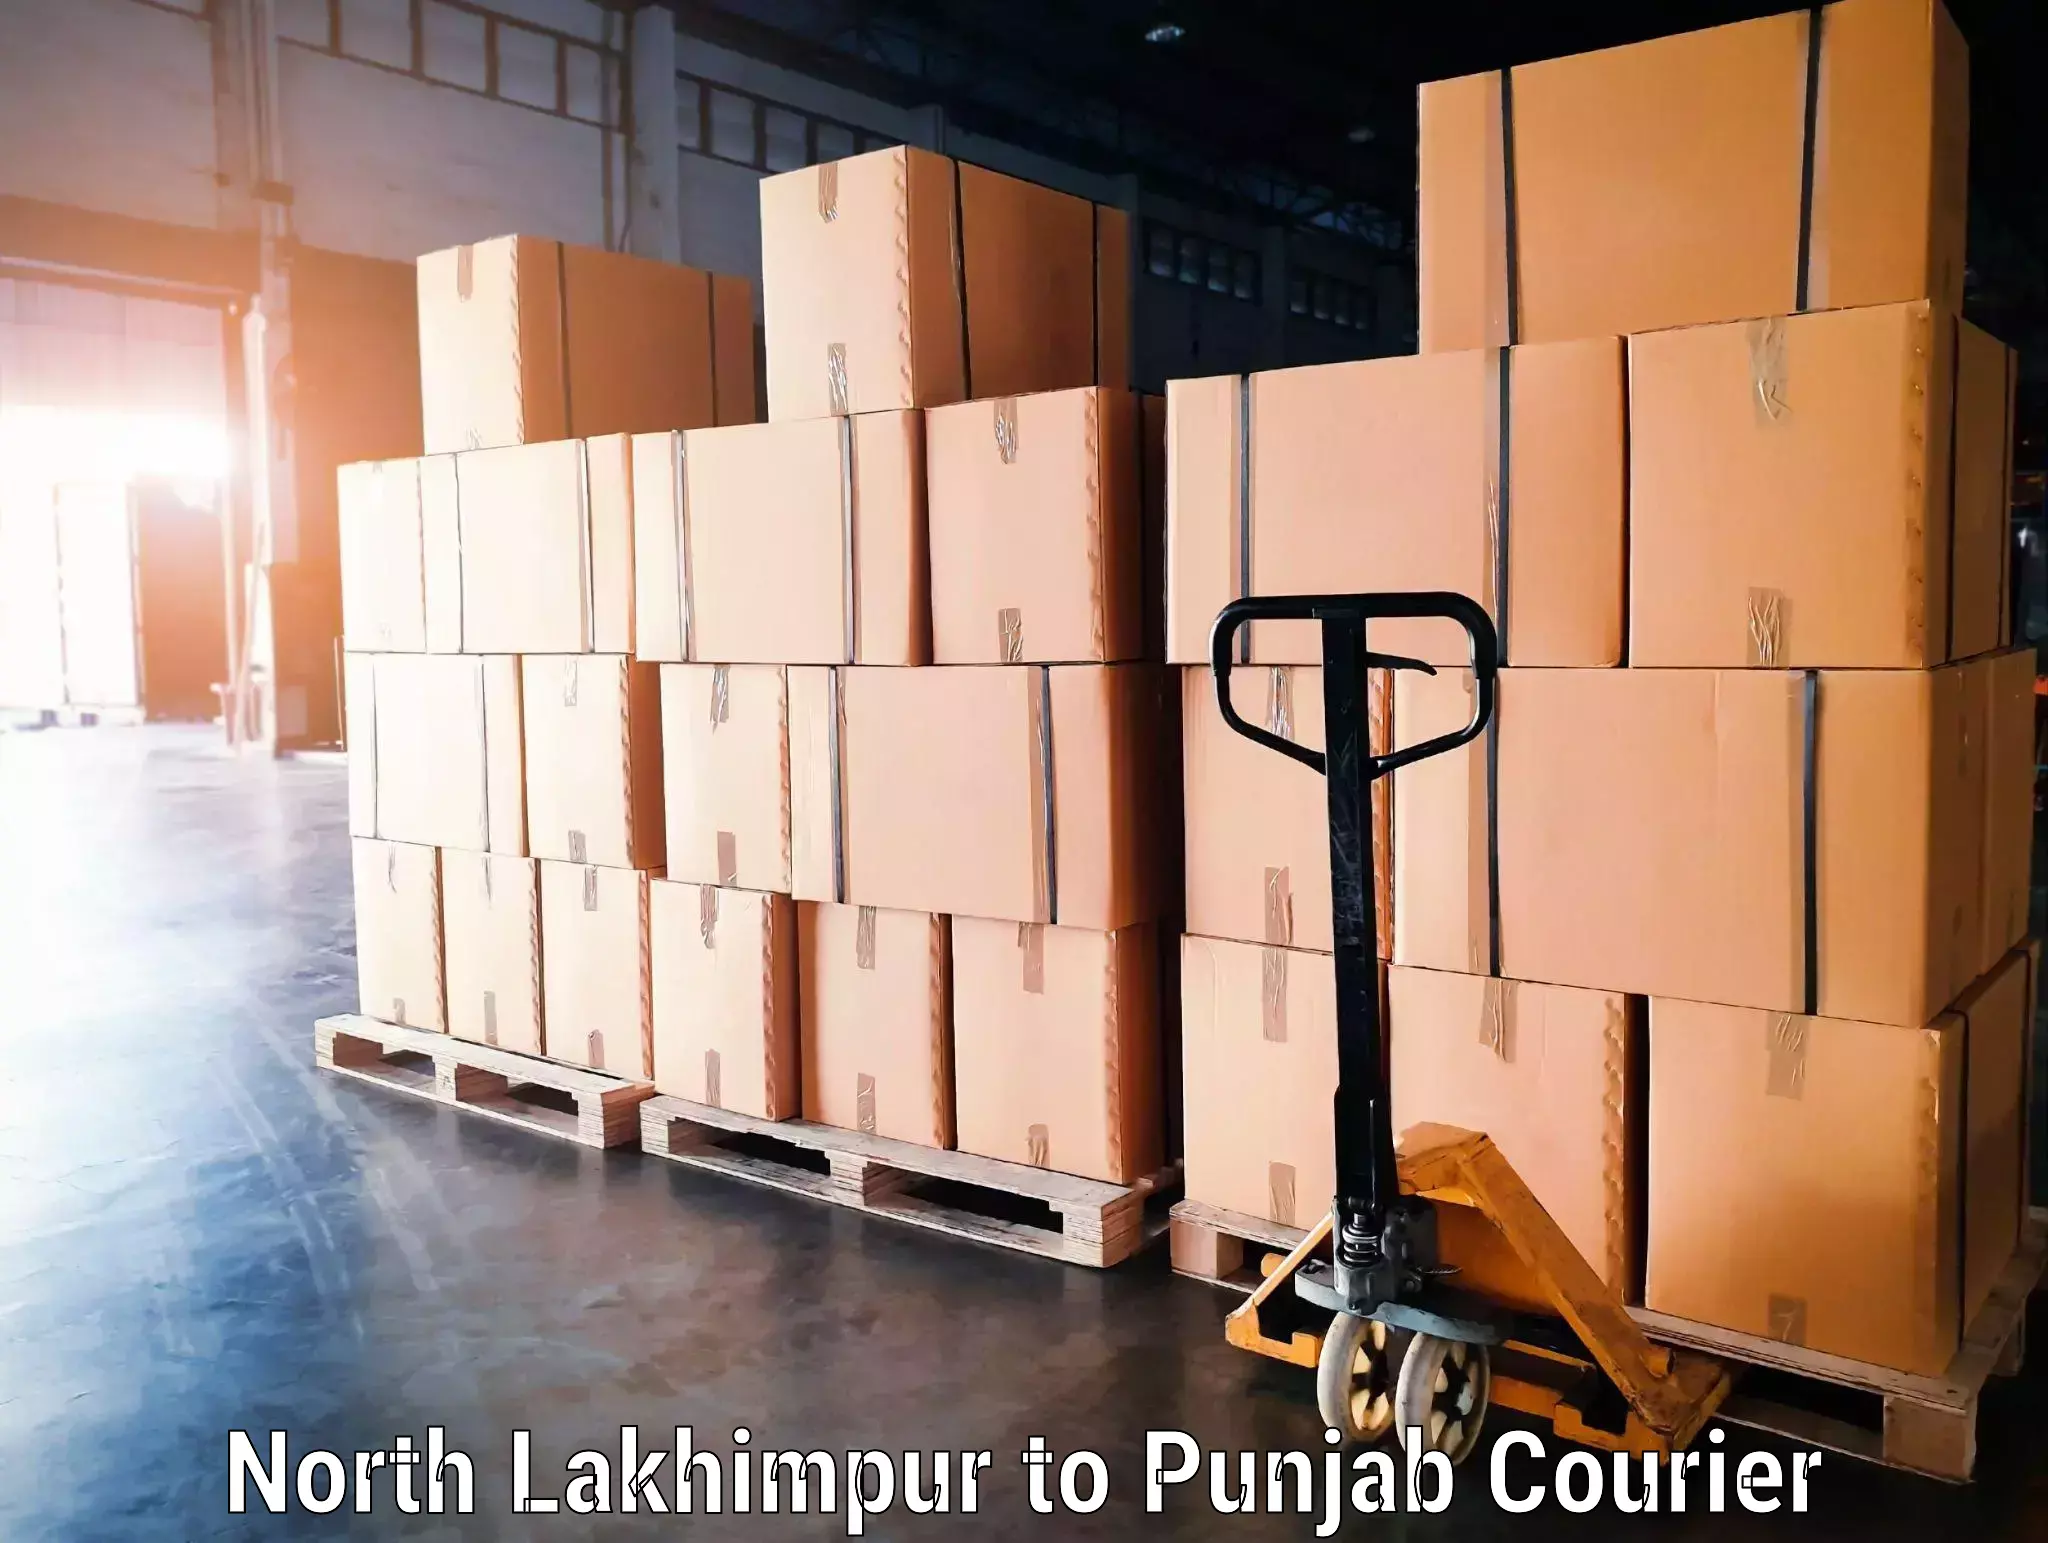 Doorstep luggage collection North Lakhimpur to Firozpur